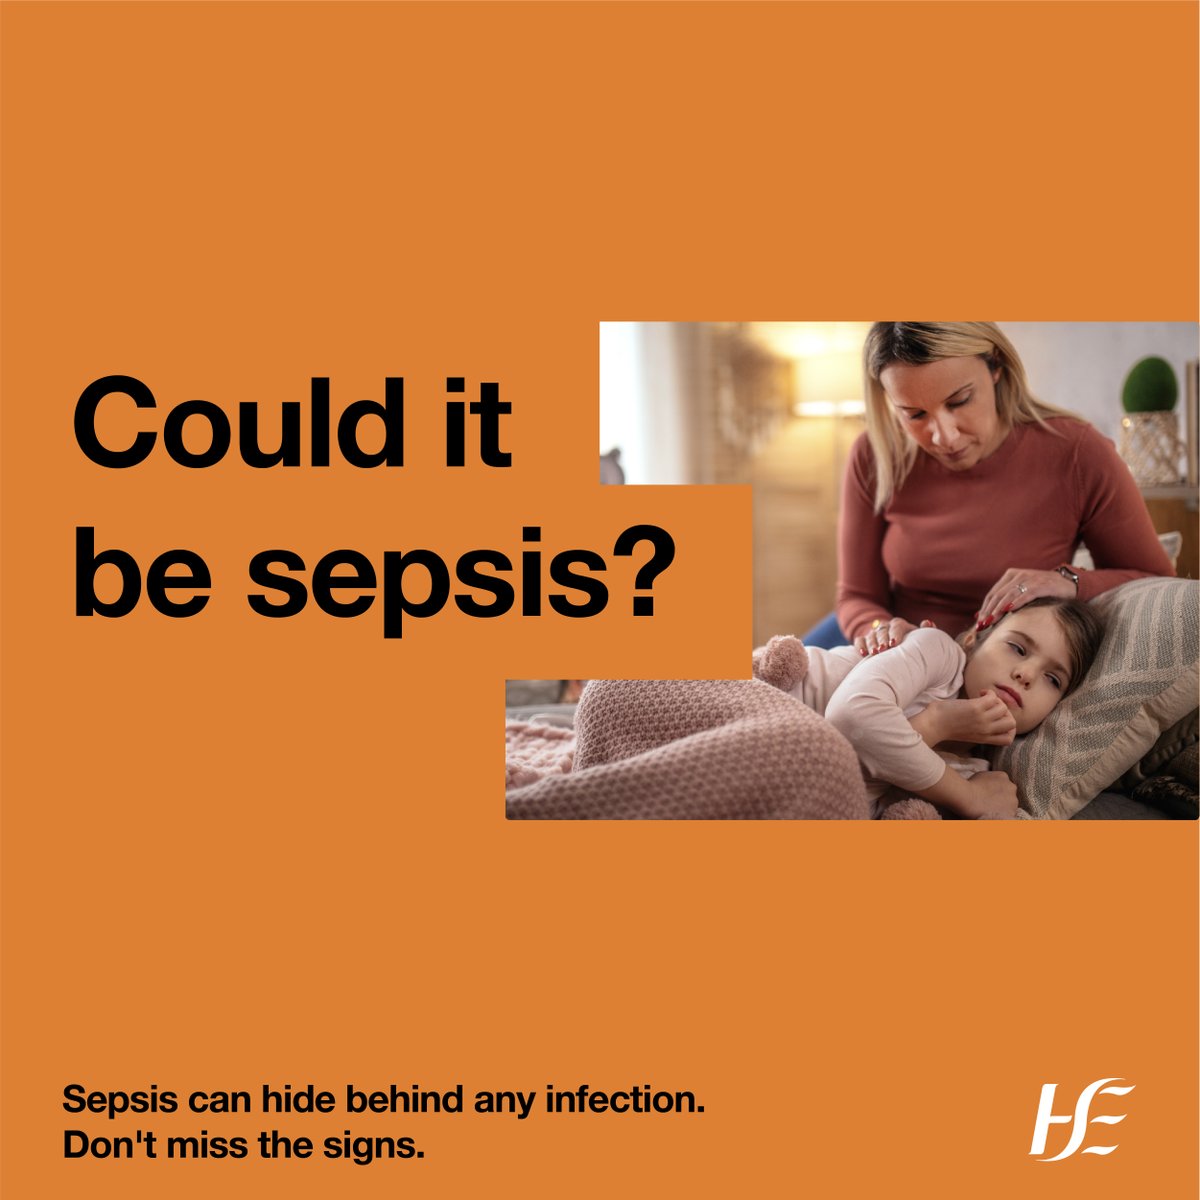 Sepsis is a life-threatening complication of an infection. If your child has had an infection and is very unwell, ask 'could it be sepsis?' For information on the symptoms to look out for, visit: bit.ly/3UWmeVg